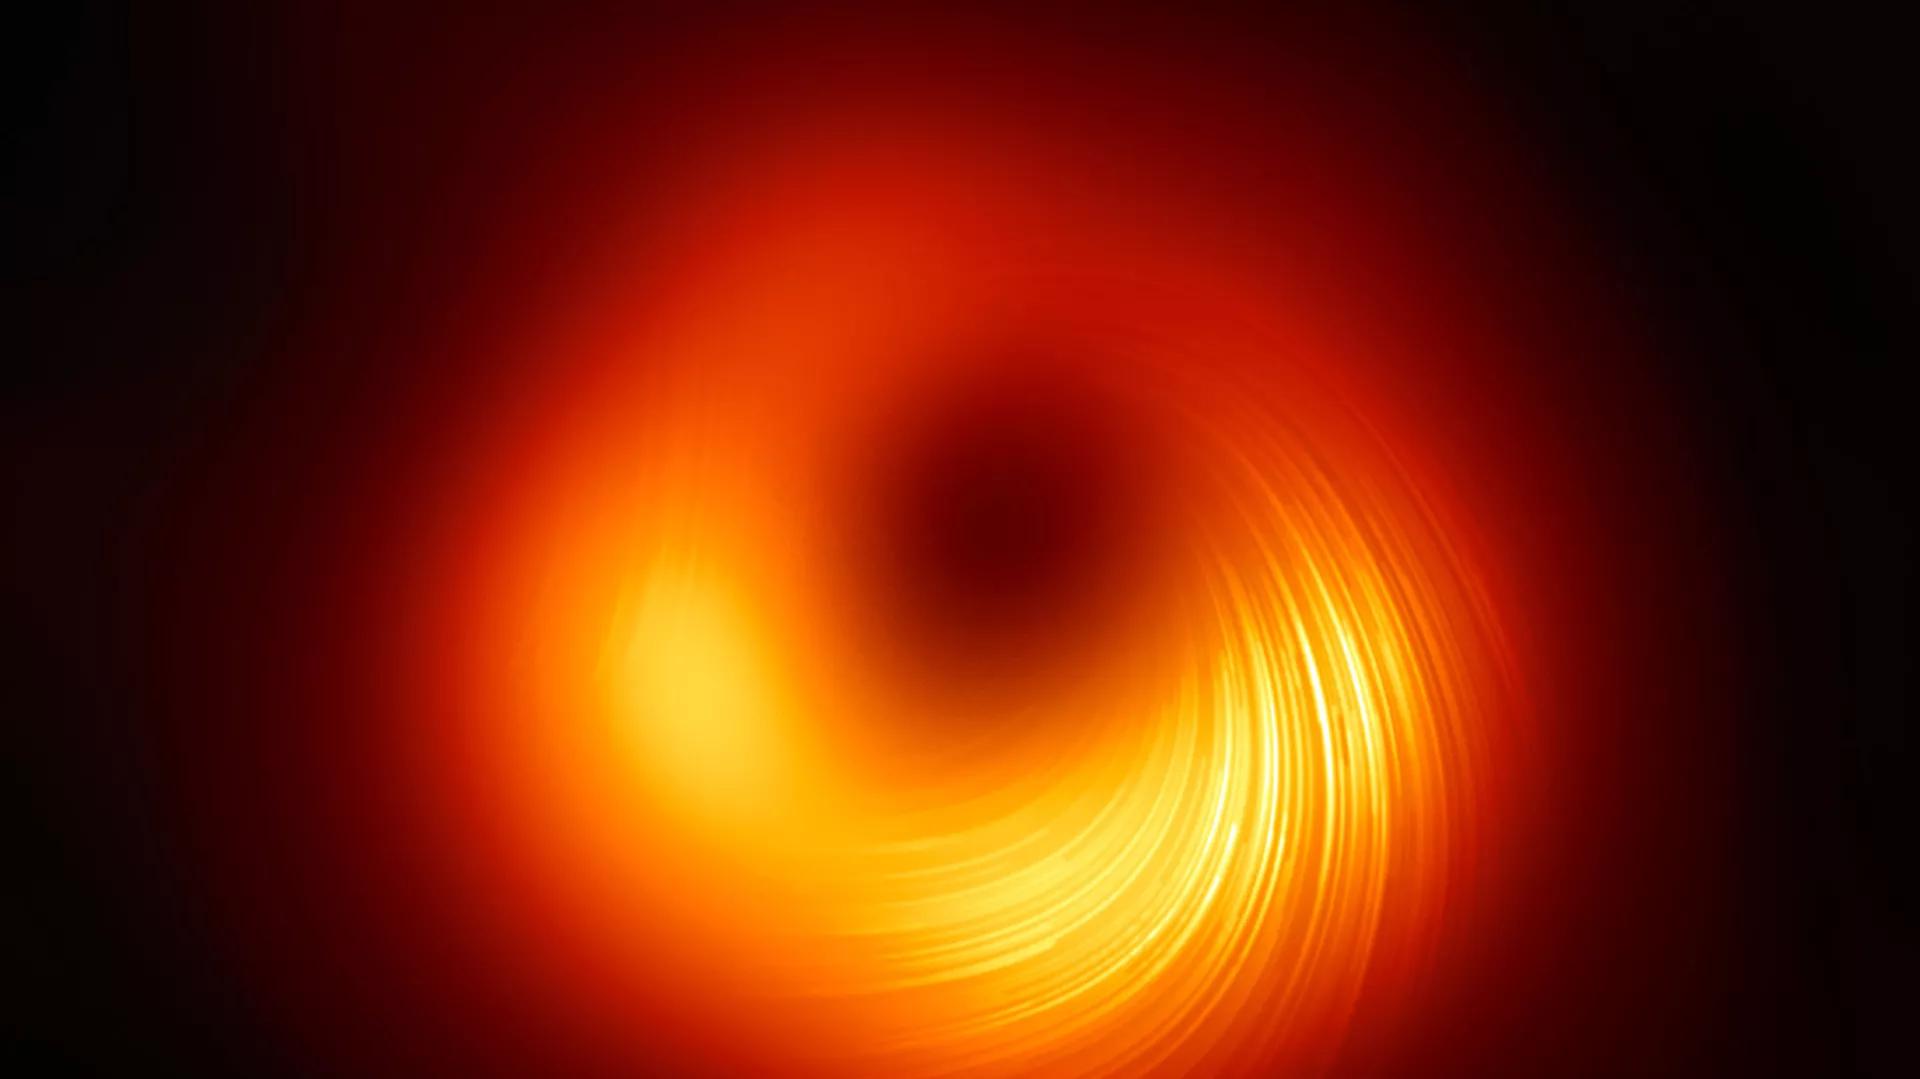 Scientists Uncover Black Hole That’s Releasing Strange ‘Burps’ of Energy